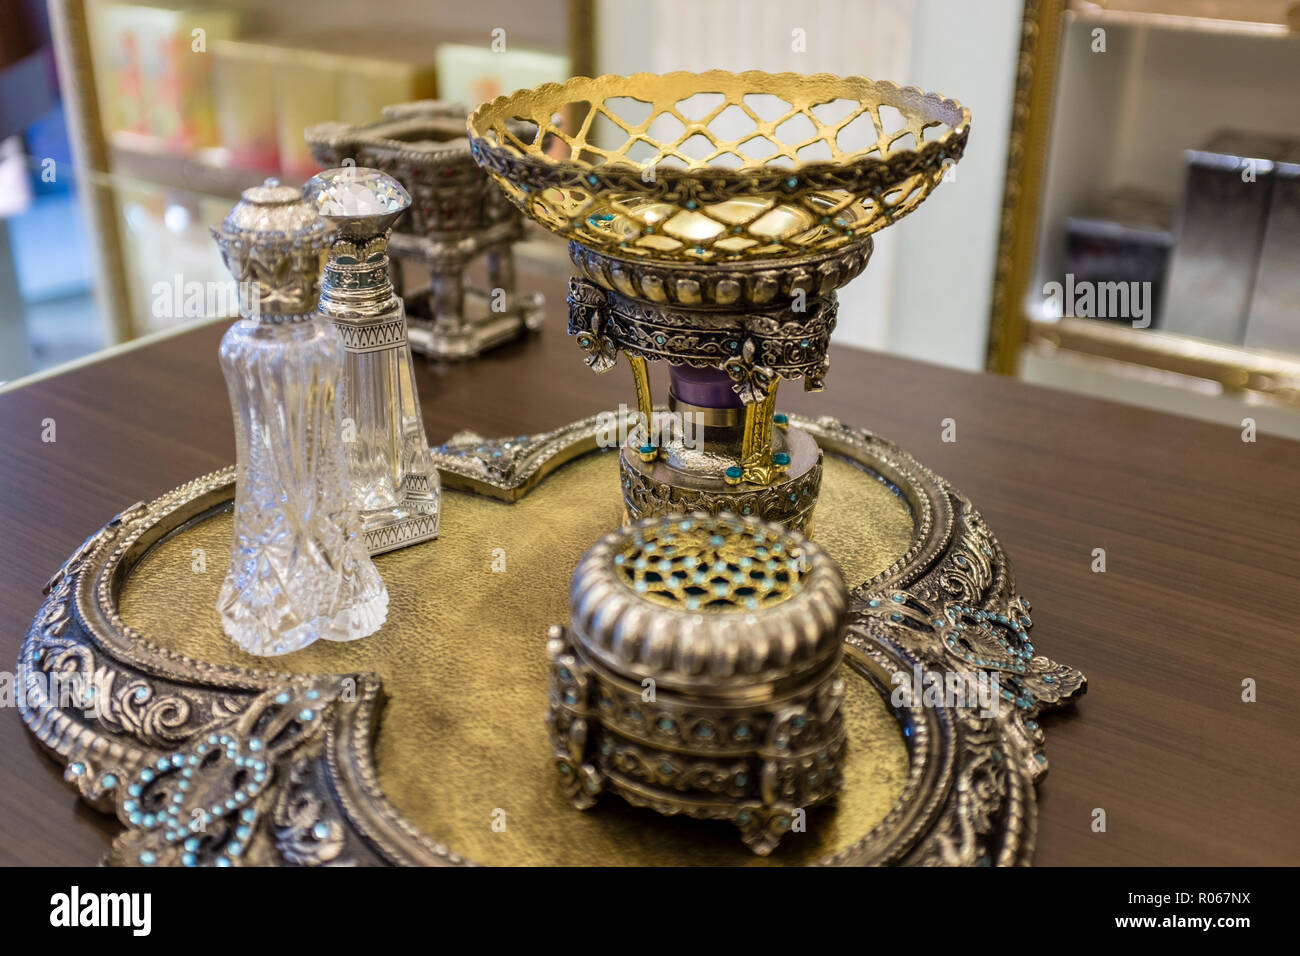 Incense burner and perfume bottles in Muttrah Souk in Muscat, Oman Stock Photo